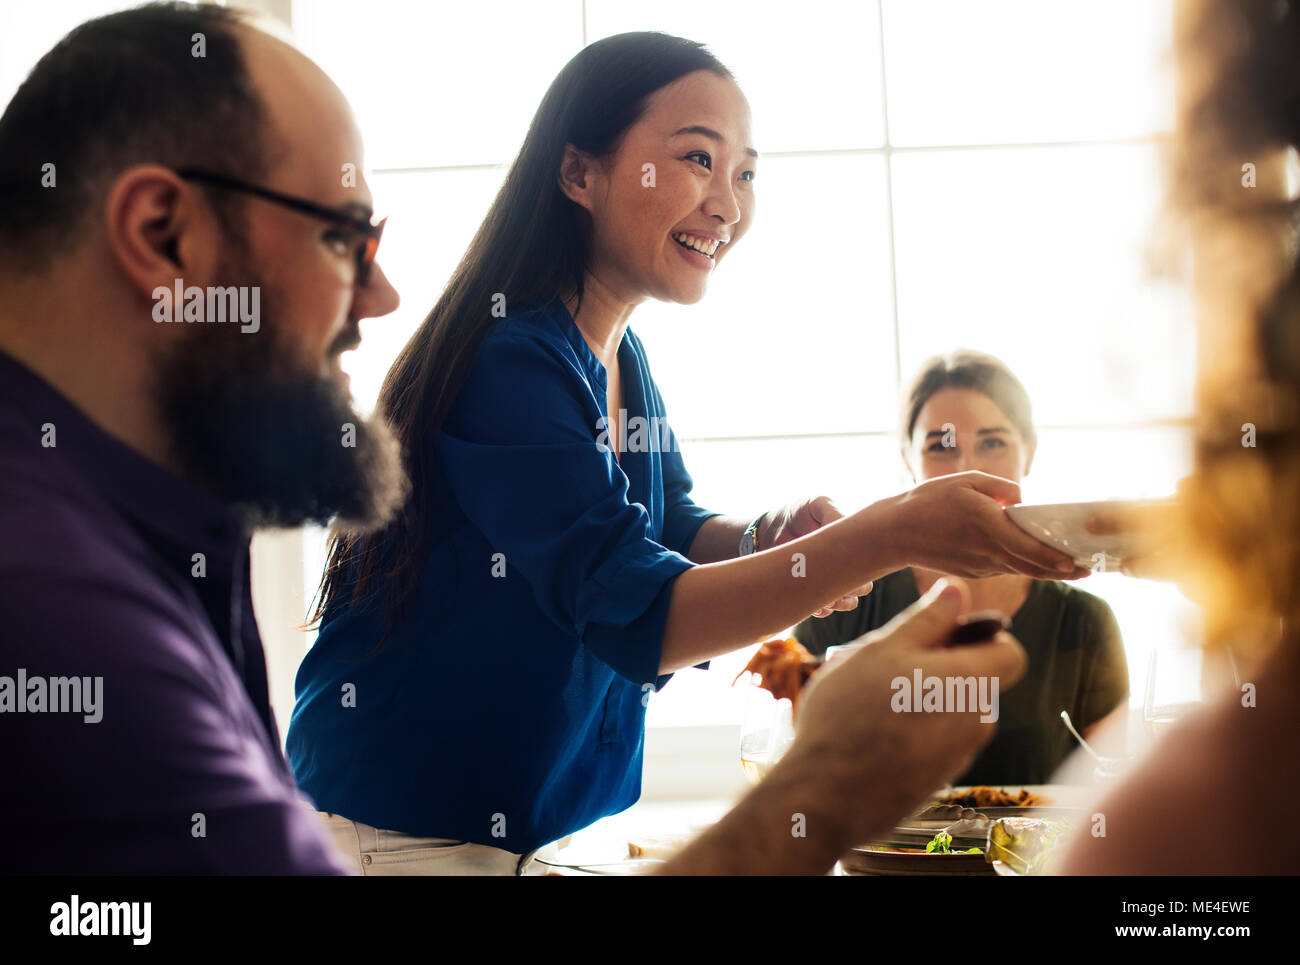 Friends celebrating holiday together Stock Photo